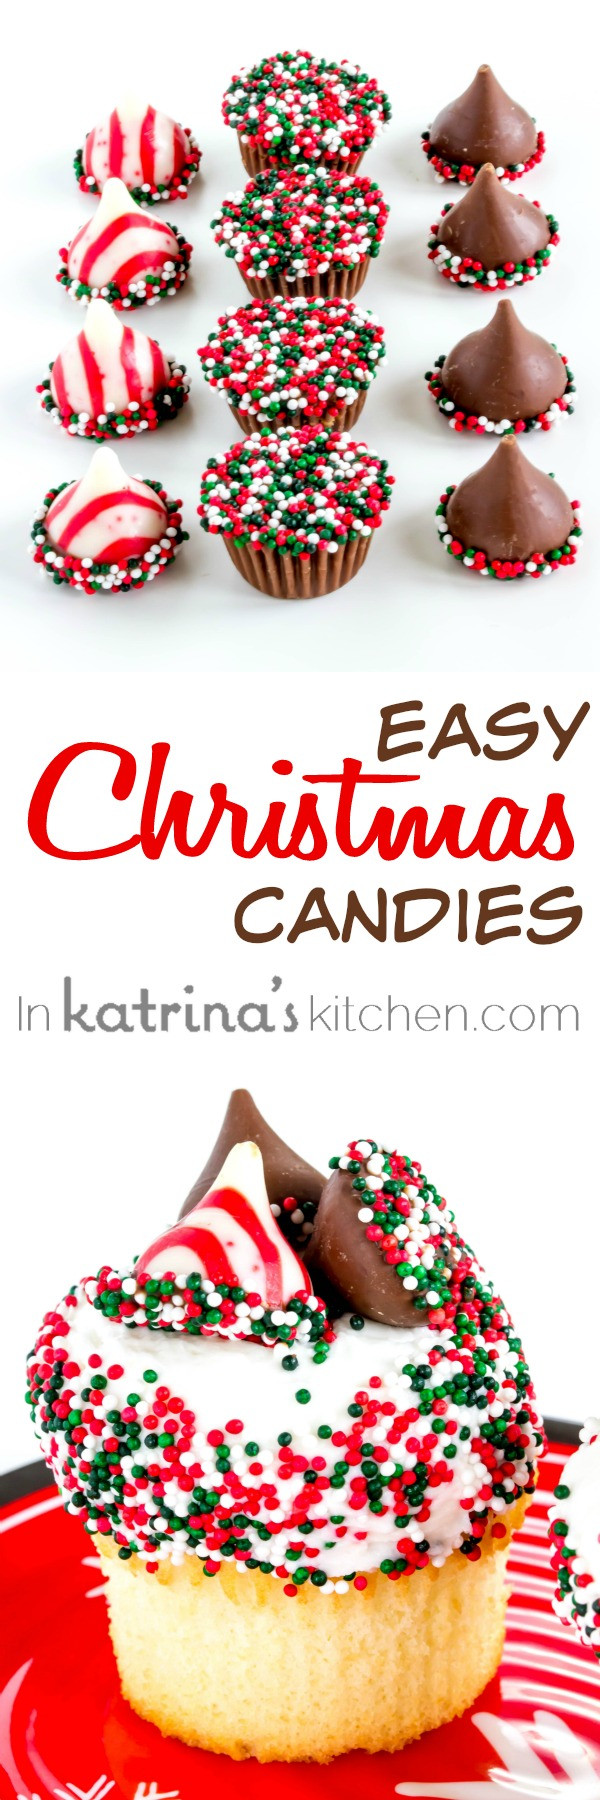 Quick And Easy Christmas Candy Recipes
 Easy Christmas Candy